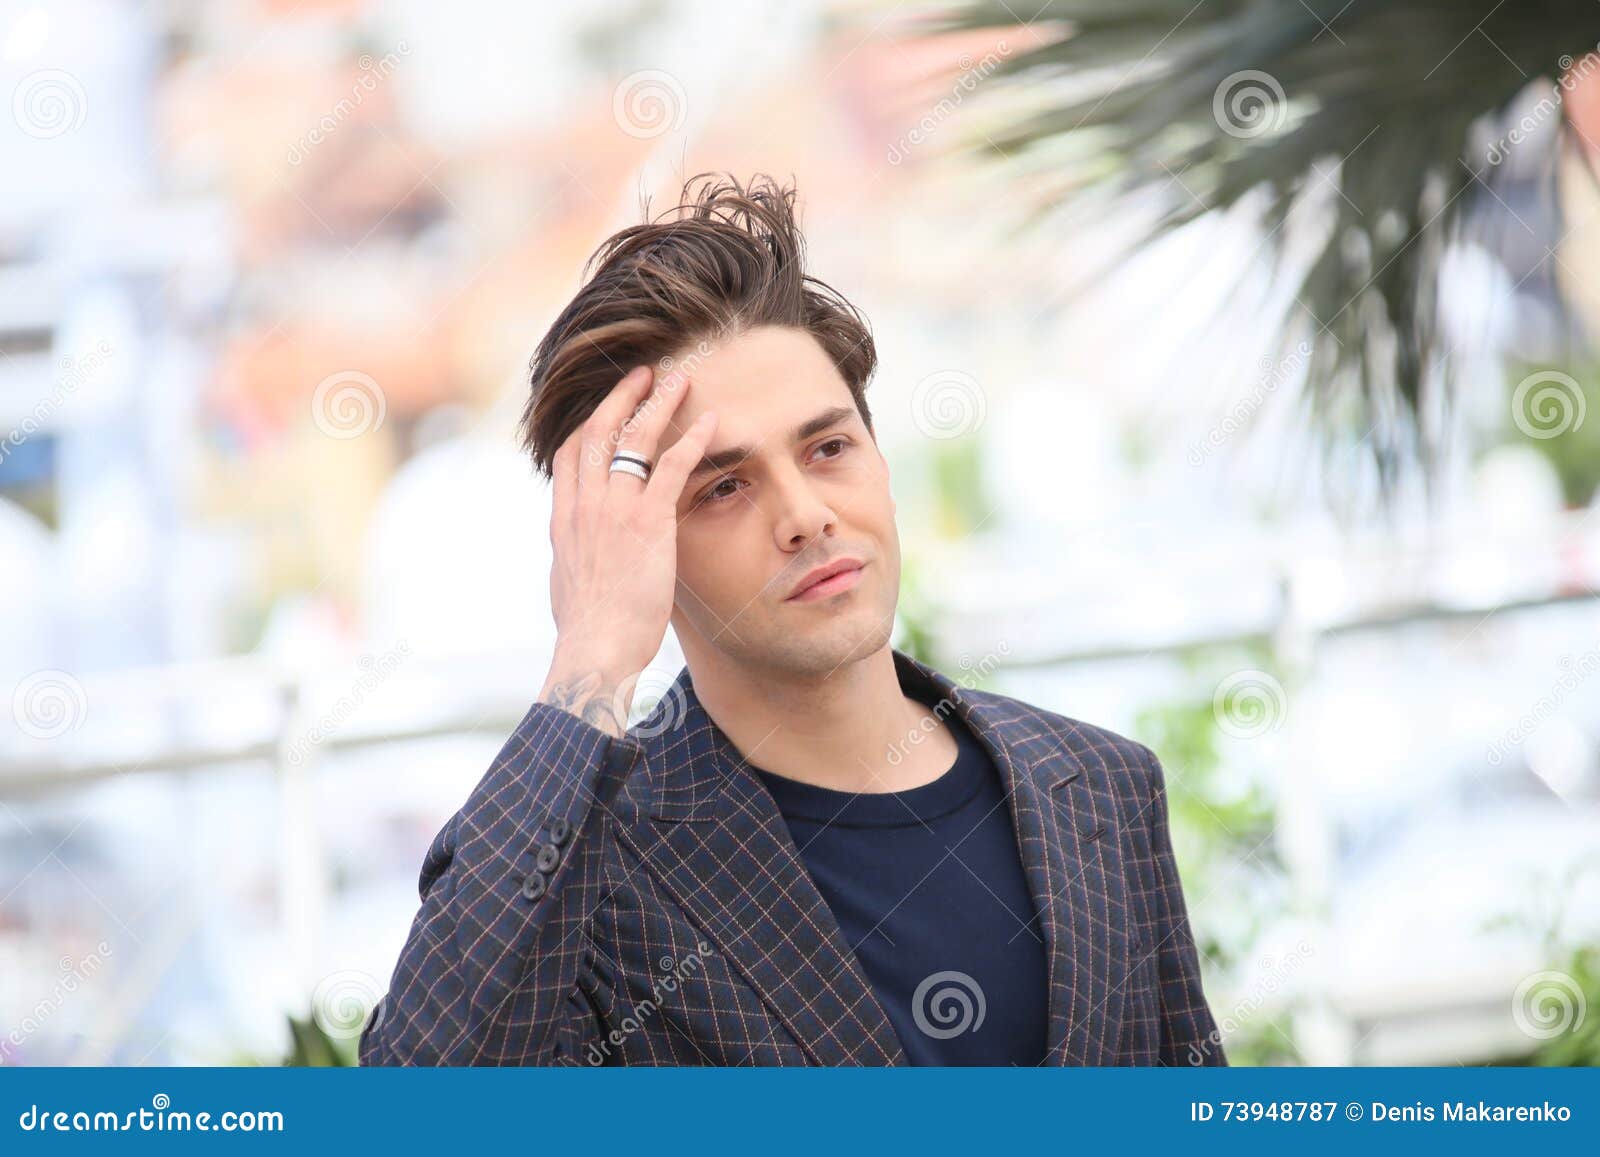 3,000 Xavier dolan Stock Pictures, Editorial Images and Stock